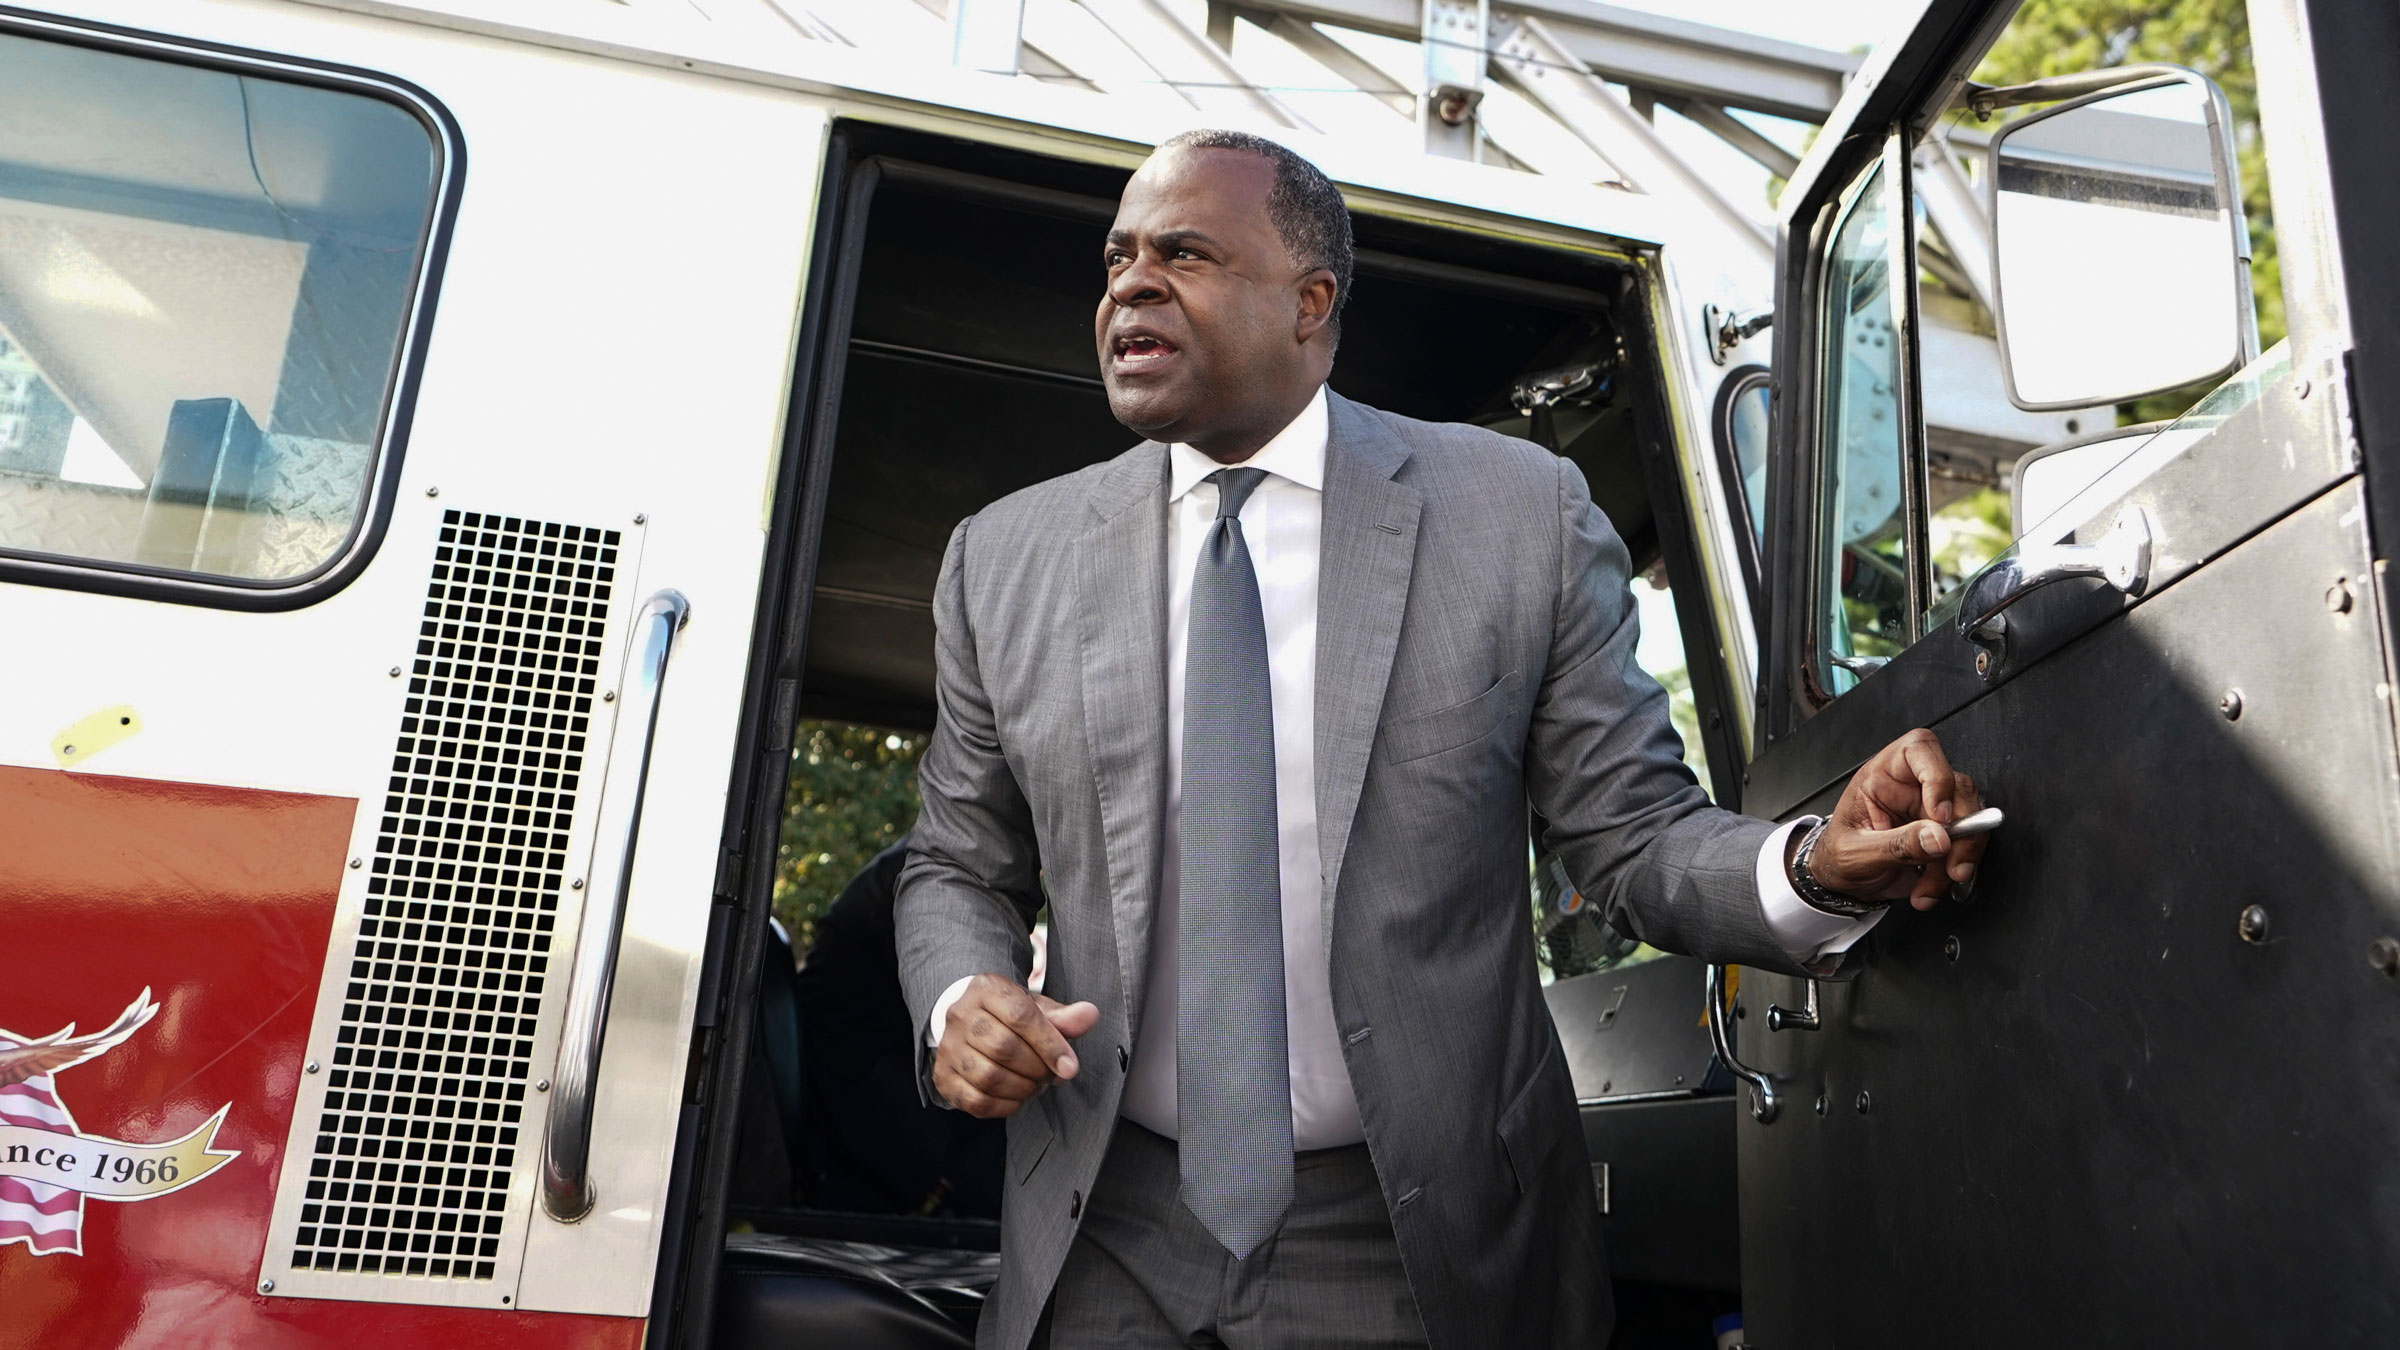 Former Atlanta Mayor Kasim Reed steps out of a fire truck after a news conference on October 7.